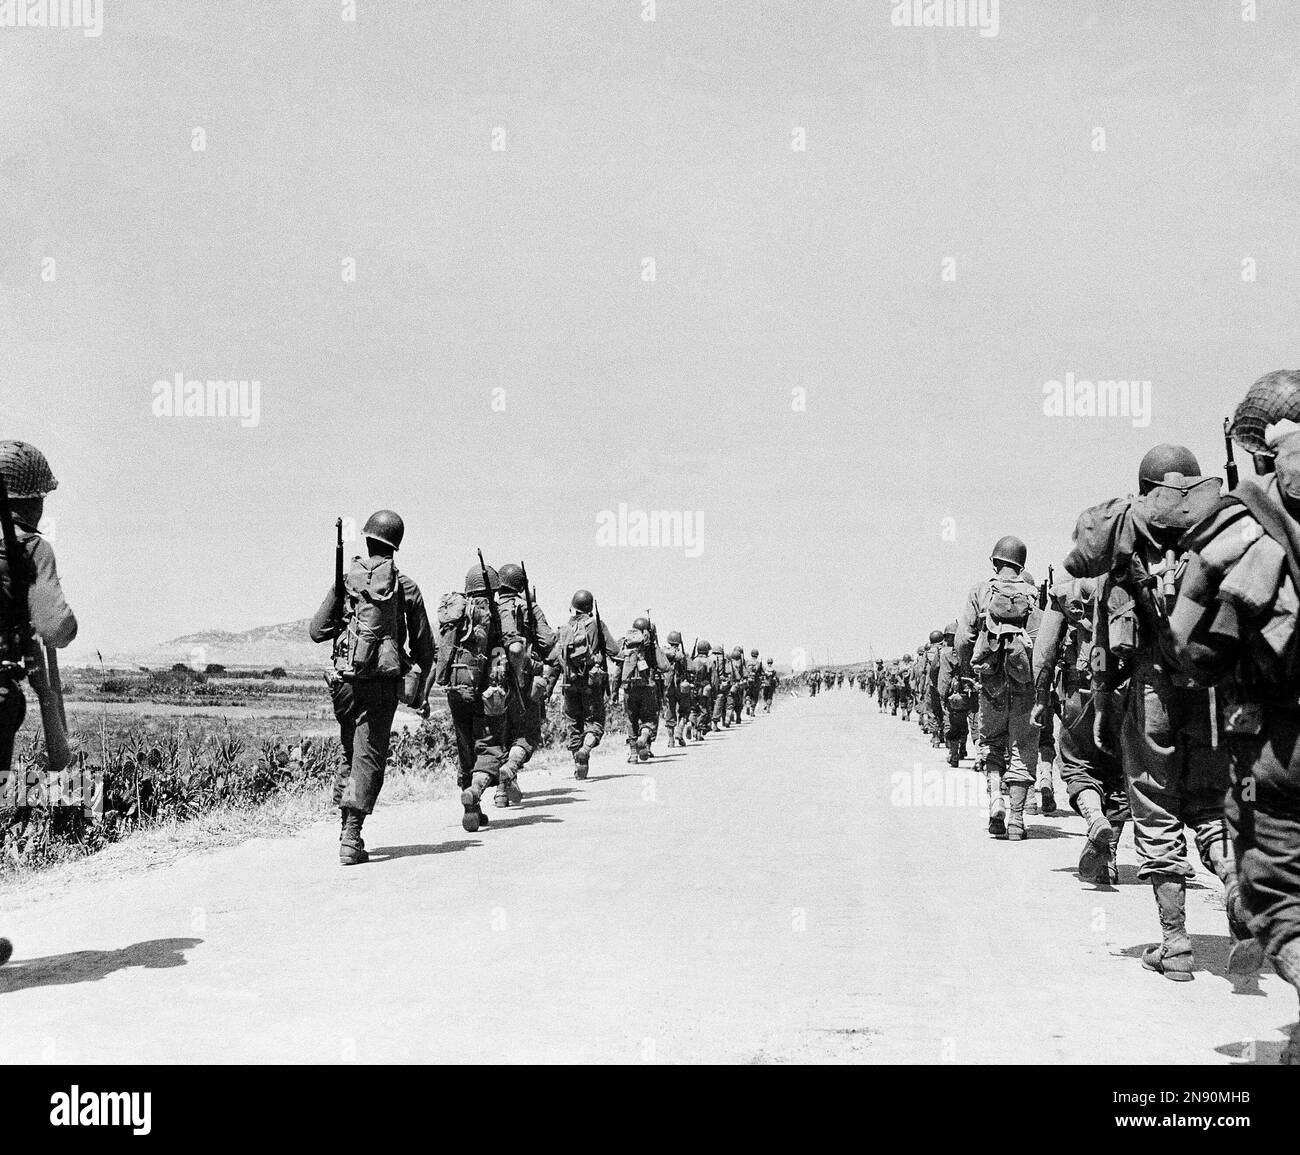 After successfully establishing beachheads in the invasion of Sicily, American troops file on both sides of a road toward the interior of the Italian island on July 24, 1943. (AP Photo) Stock Photo